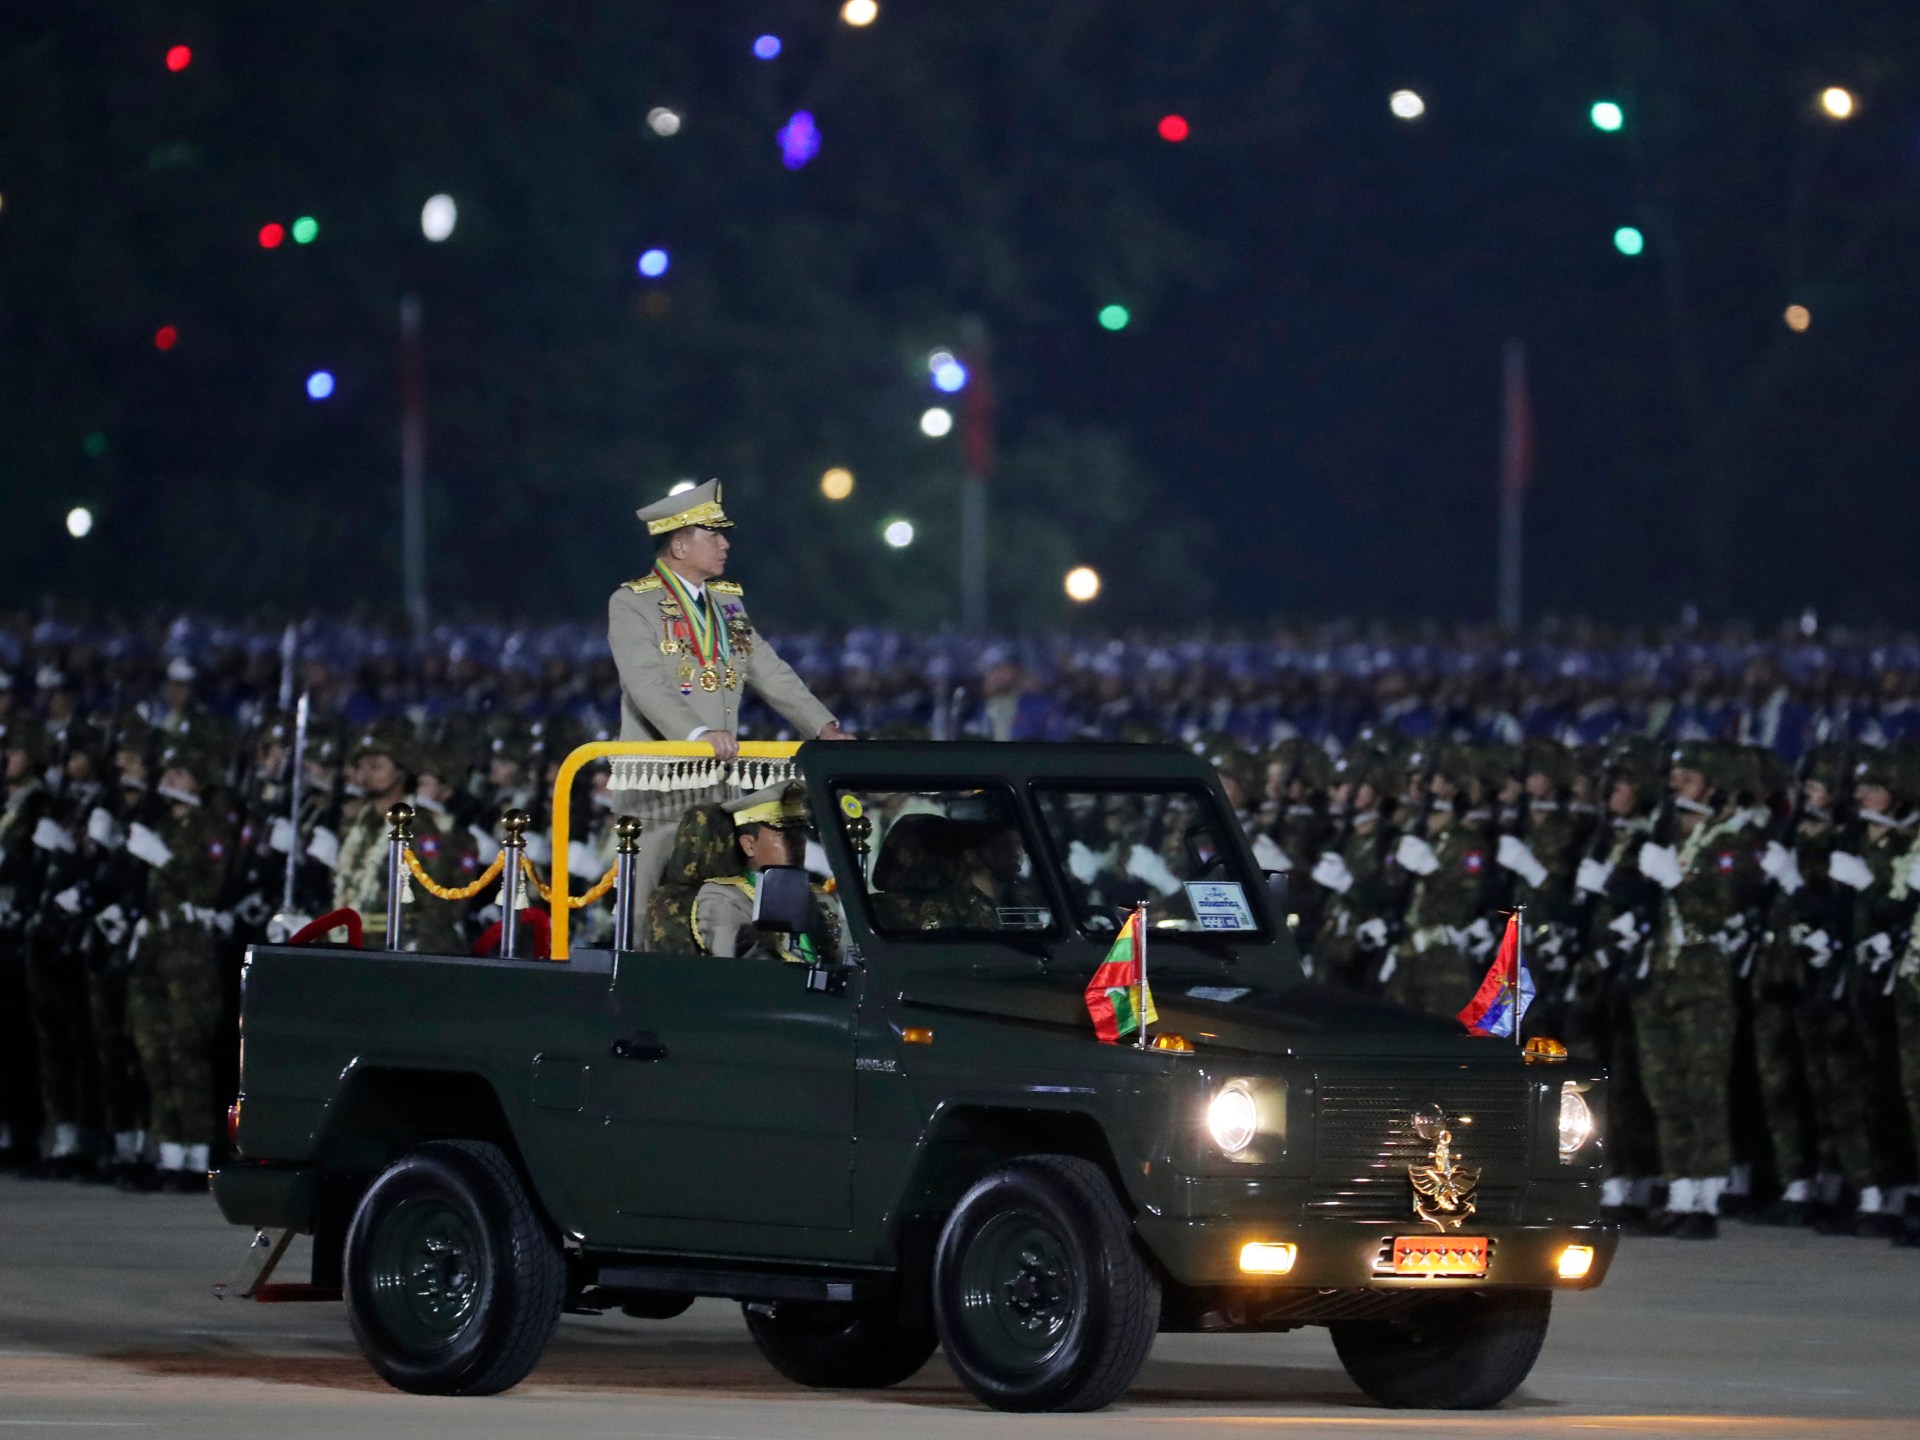 Min Aung Hlaing talks tough as Myanmar’s armed forces face growing pressure | Conflict News